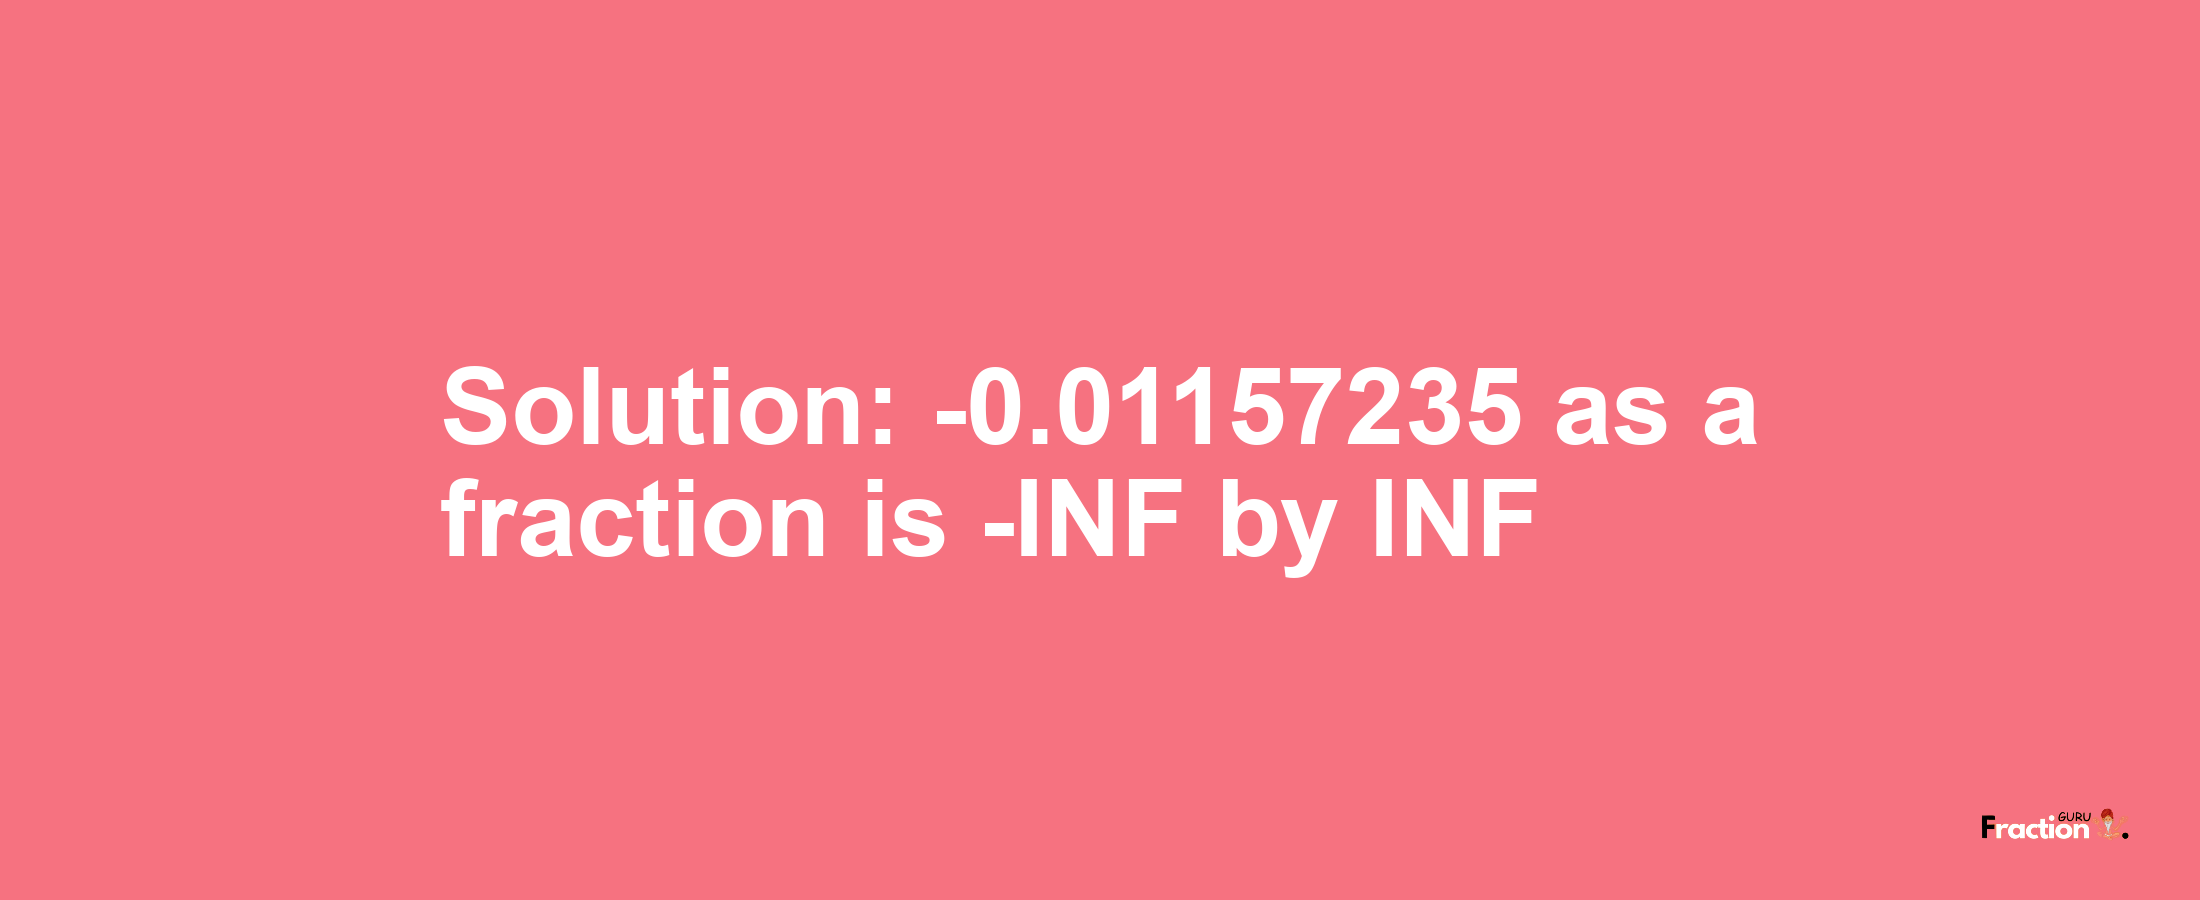 Solution:-0.01157235 as a fraction is -INF/INF